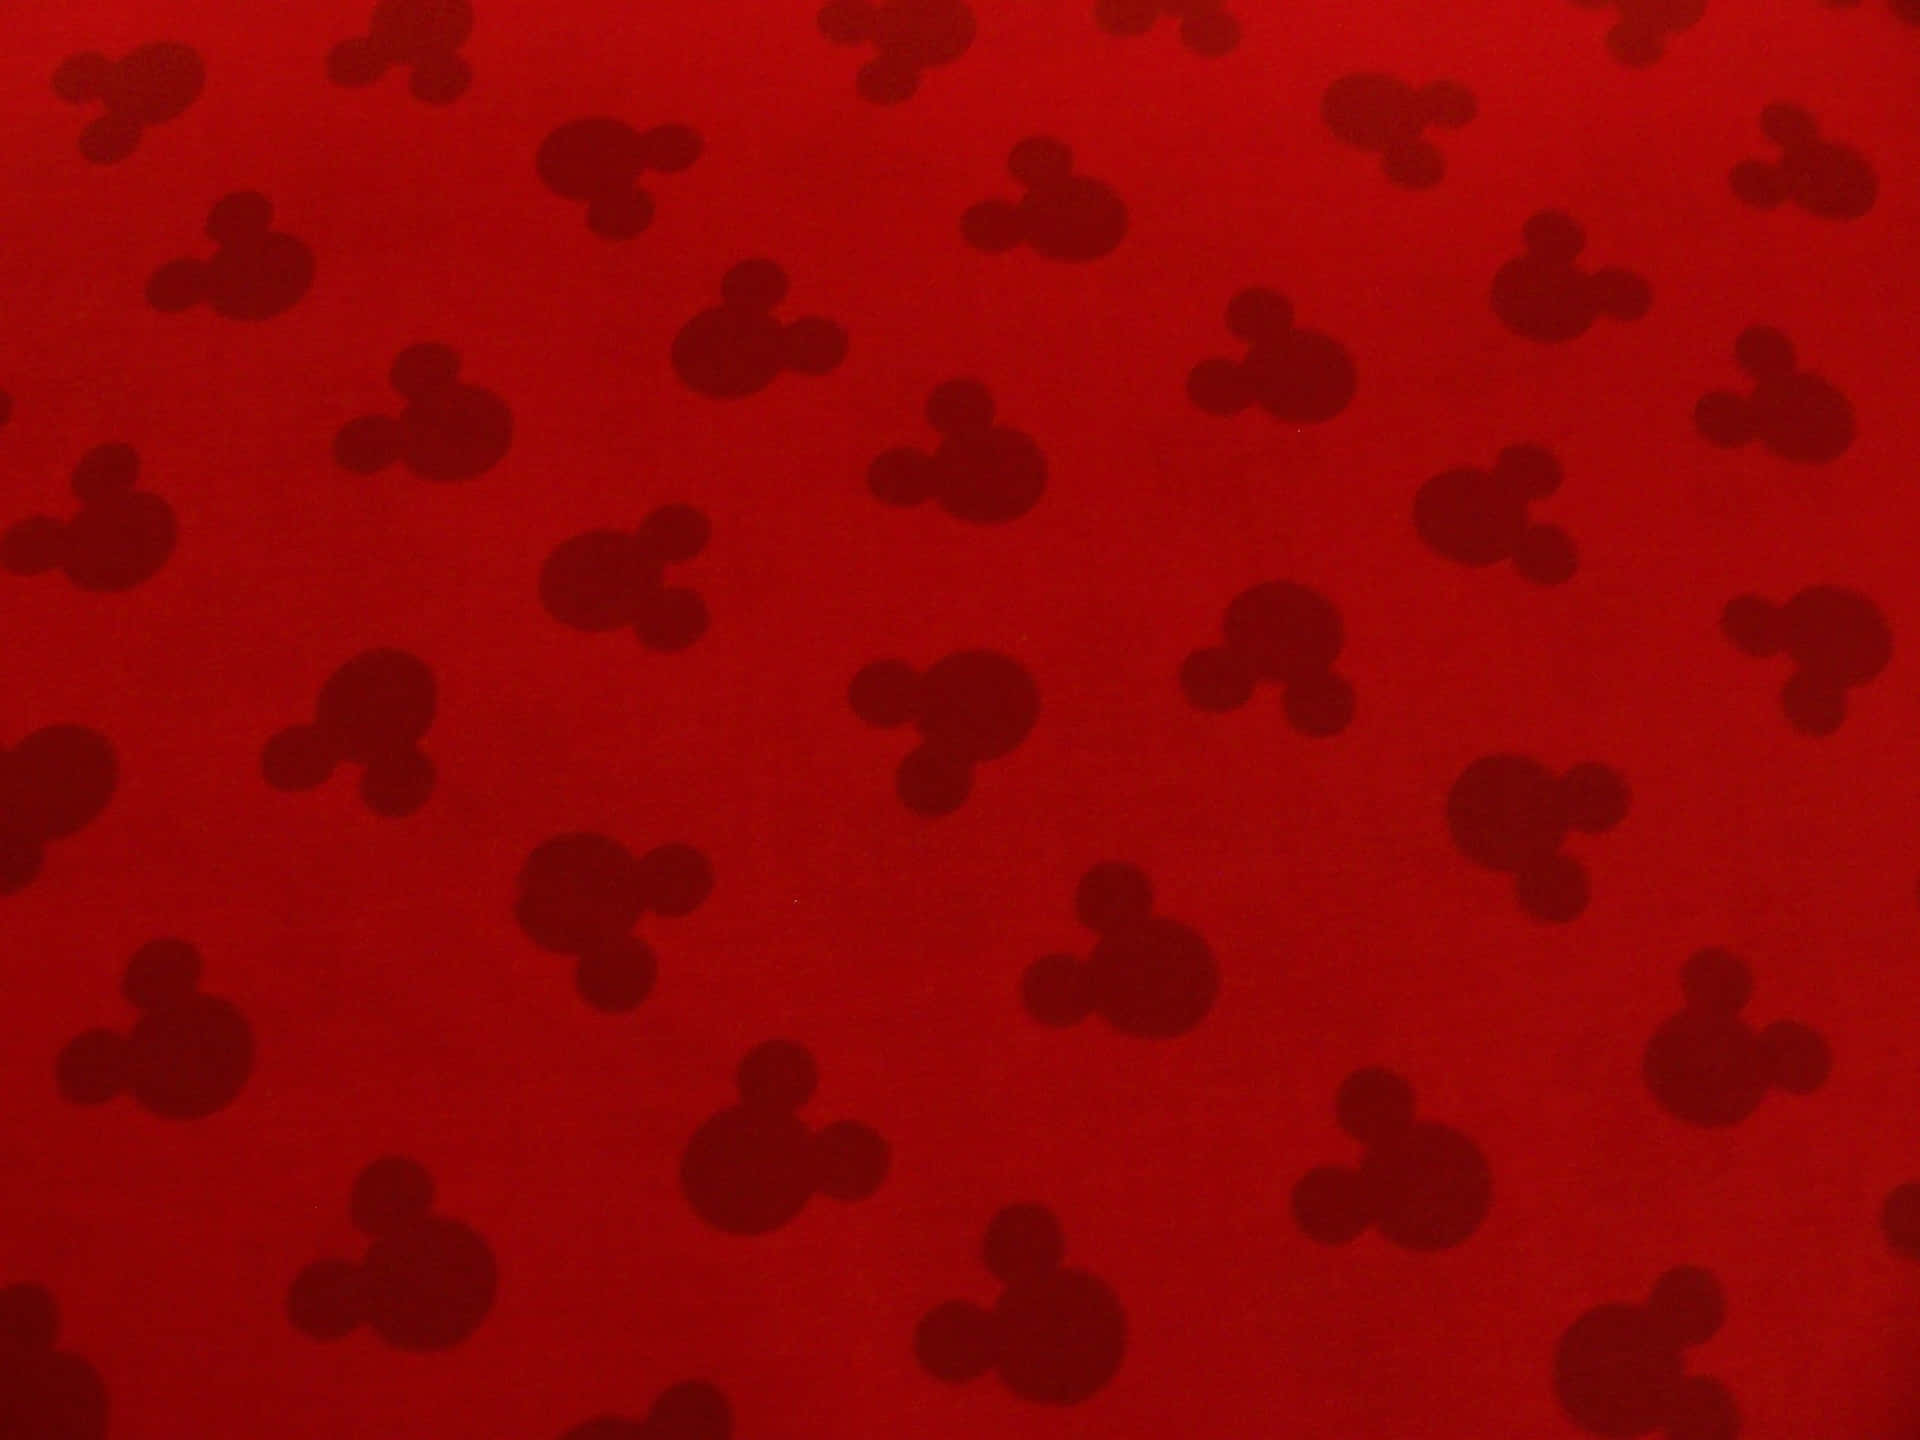 Mickey Mouse Ears - the quintessential symbol of Disney fun! Wallpaper